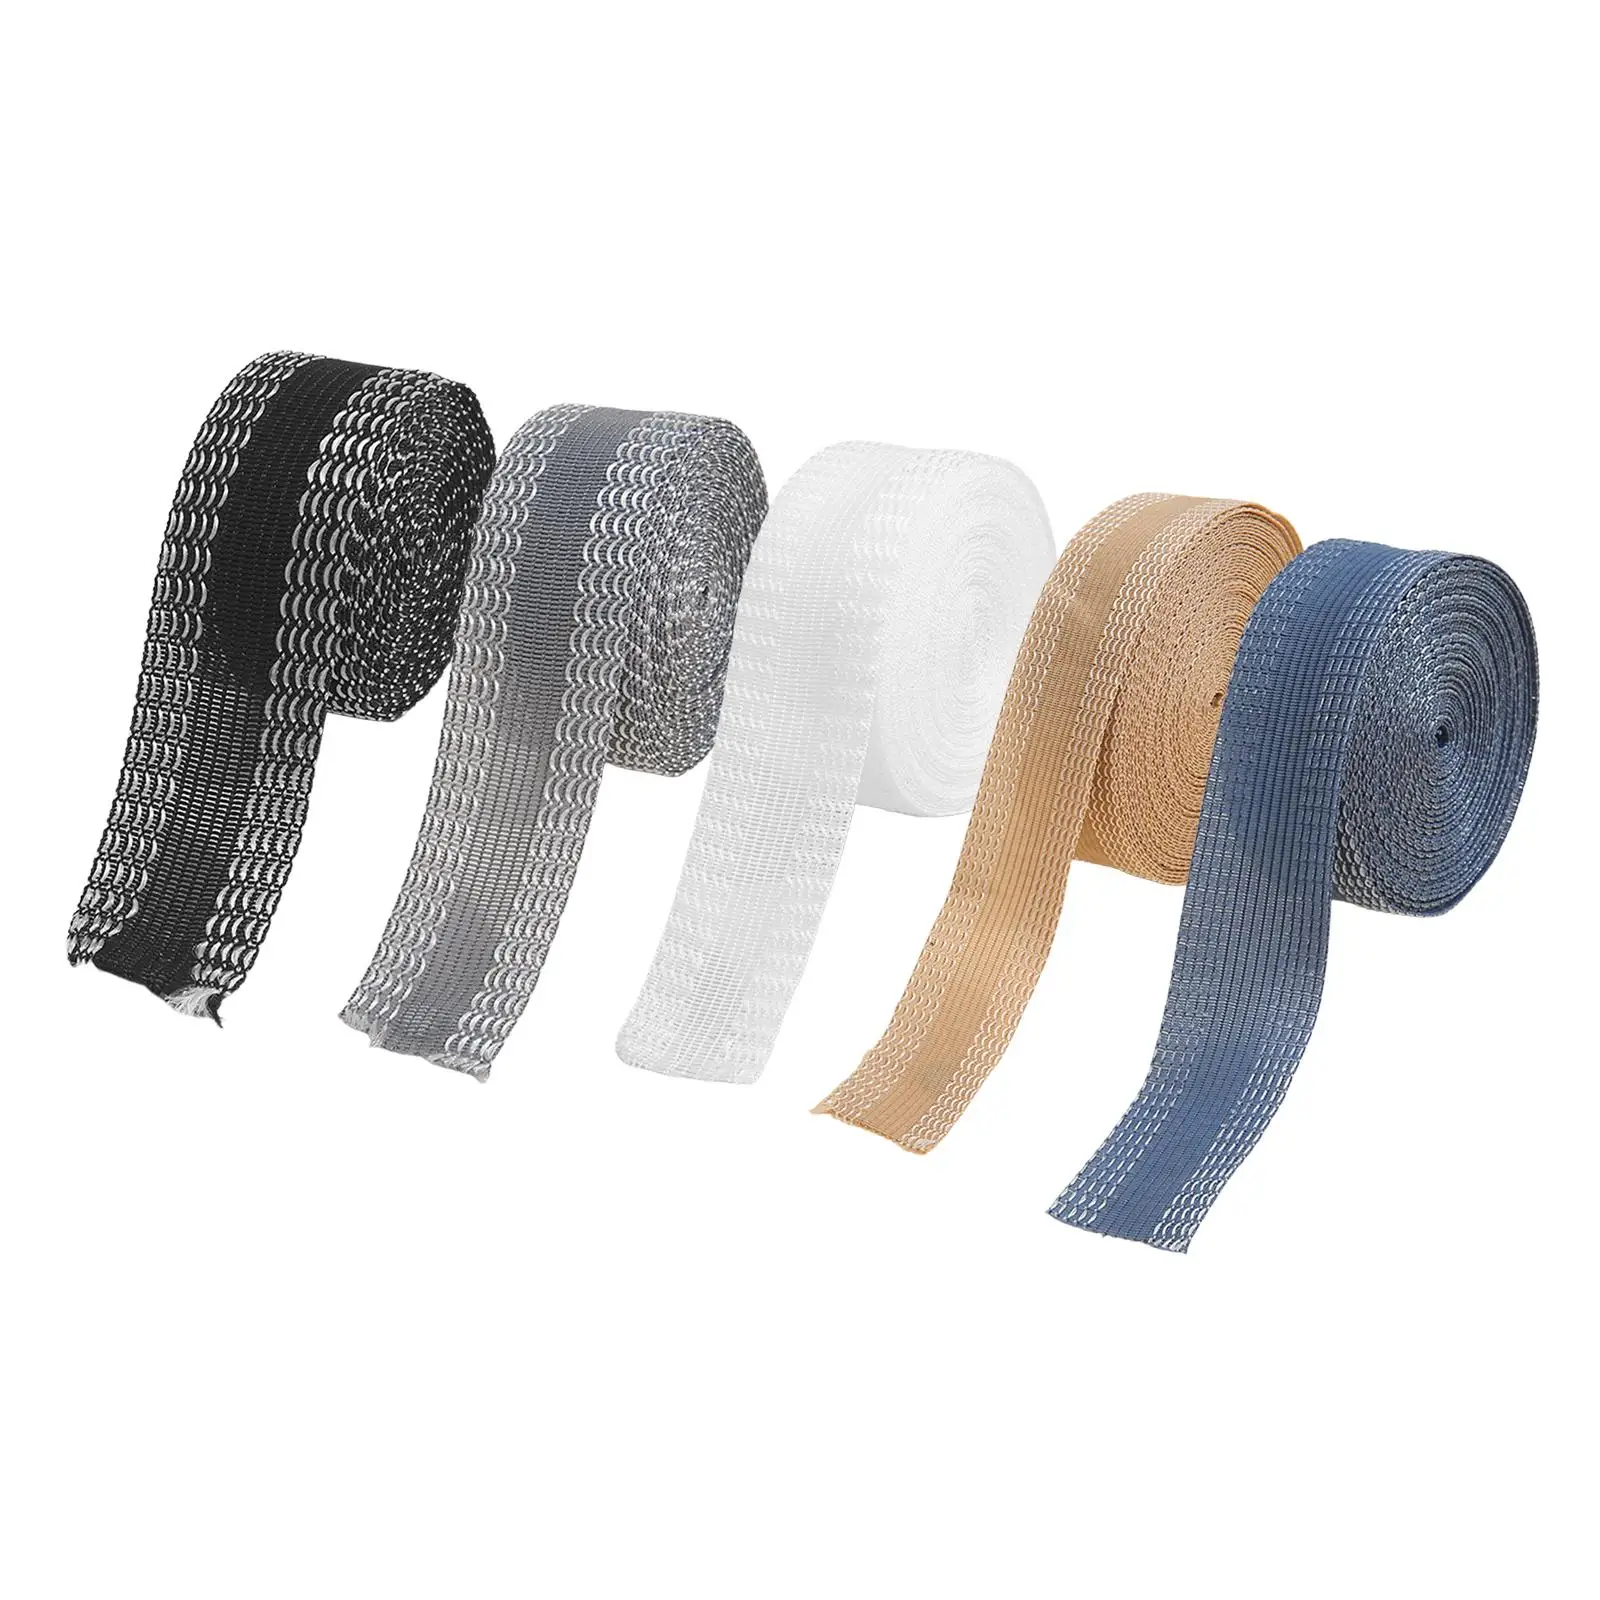 5M Pants Edge Shorten Hem Tape Self Adhesive Sewing Iron On Foot Presser Hemming Tape for Suit Pants Jeans Skirts Clothes